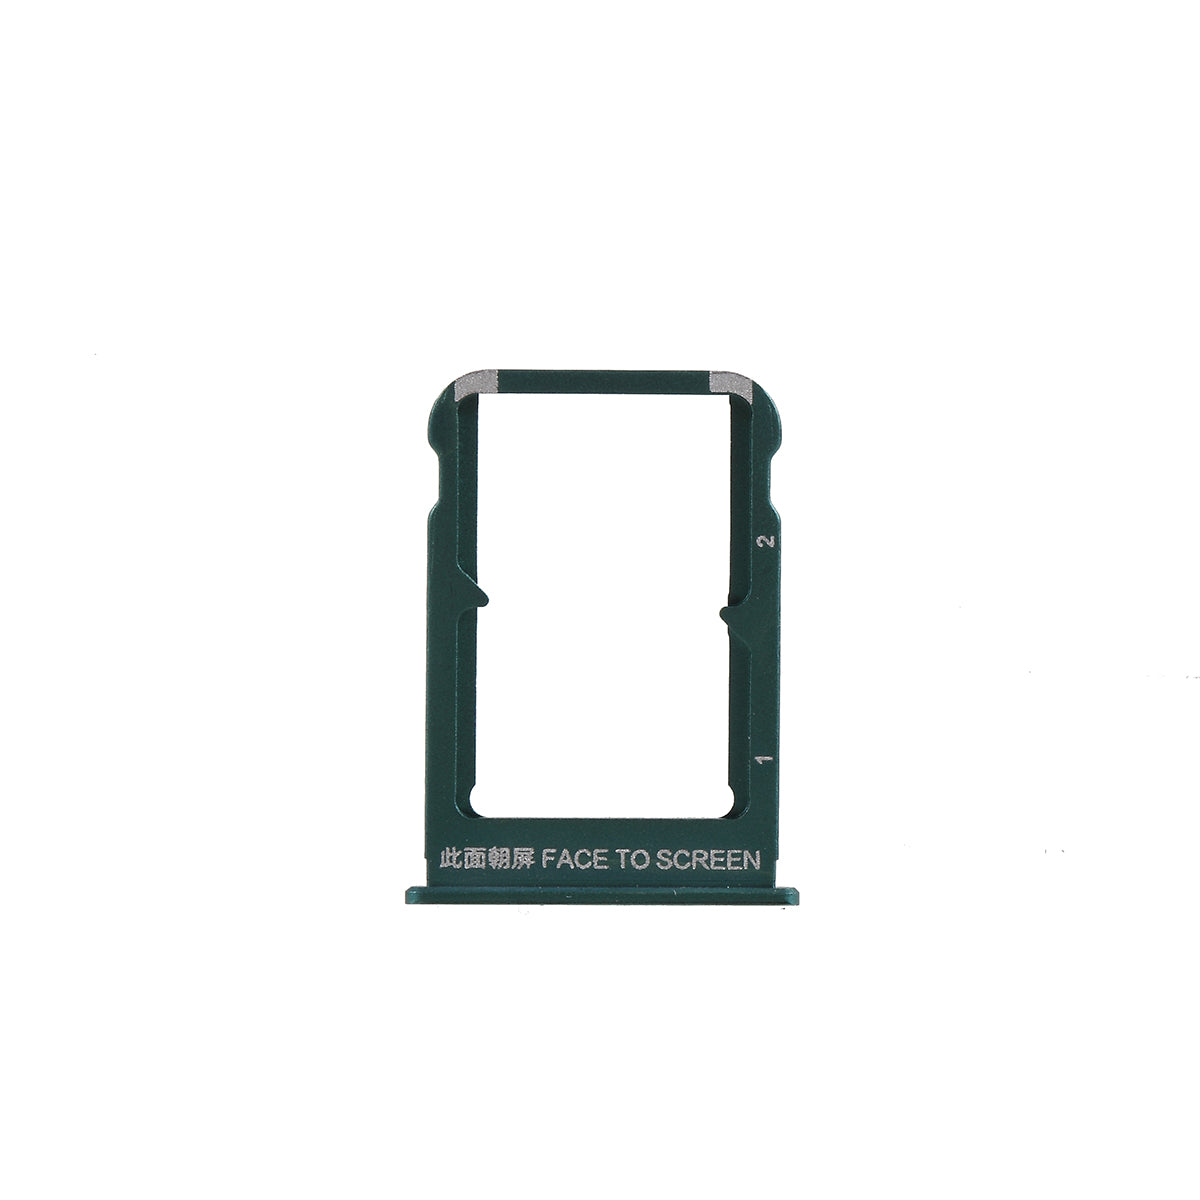 OEM Dual SIM Card Tray Holder Replace Part for Xiaomi Mi Mix 3 - Army Green